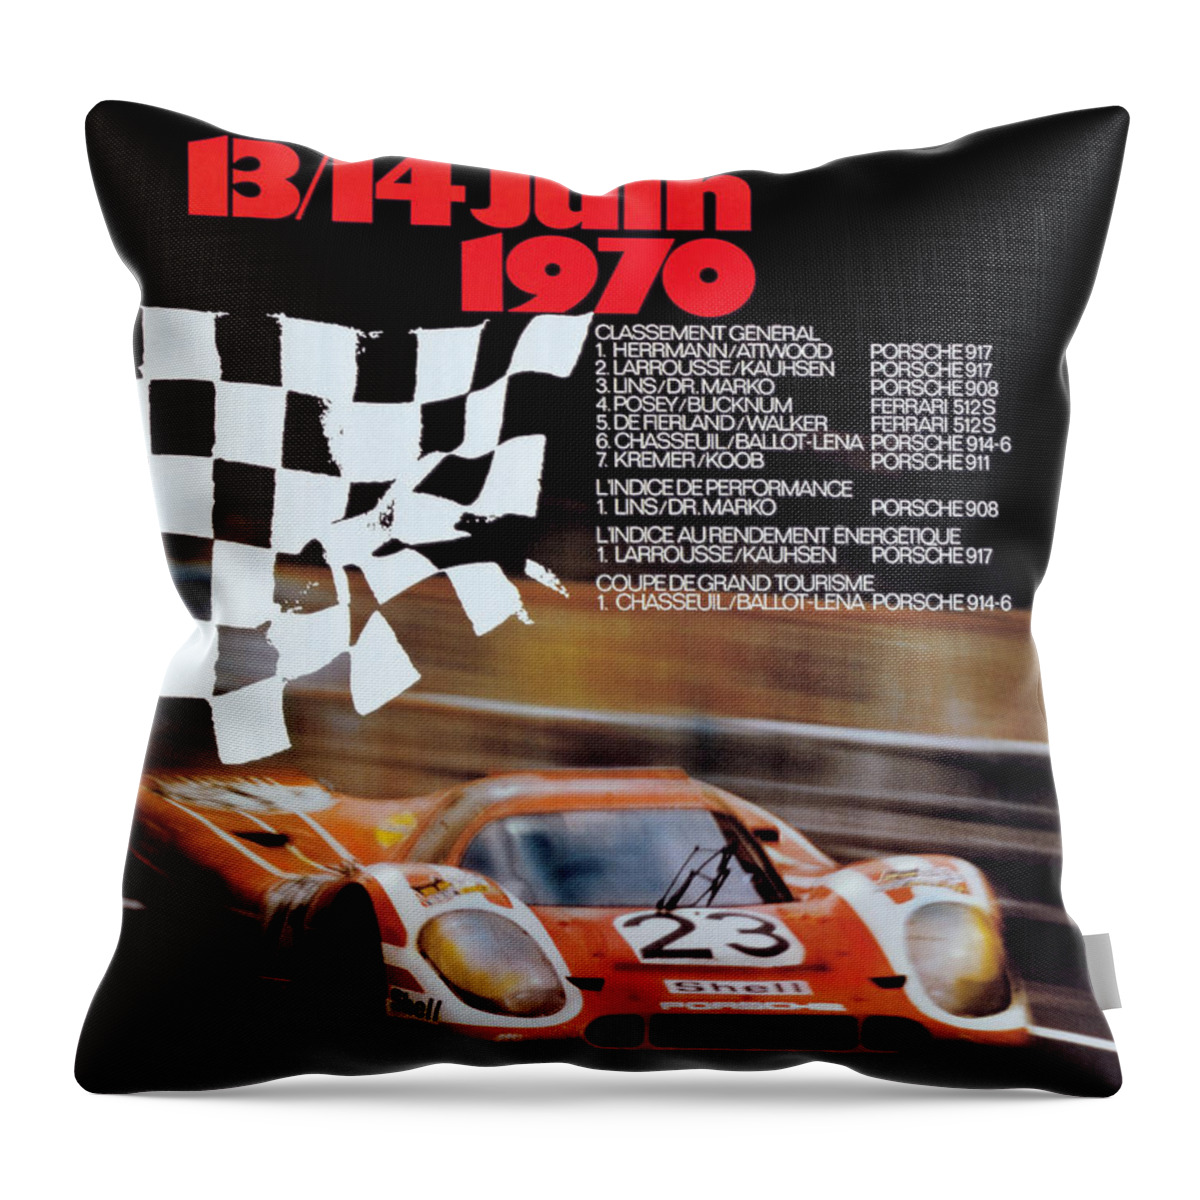 24 Hours Of Le Mans Throw Pillow featuring the digital art 1970 24hr Le Mans by Georgia Fowler